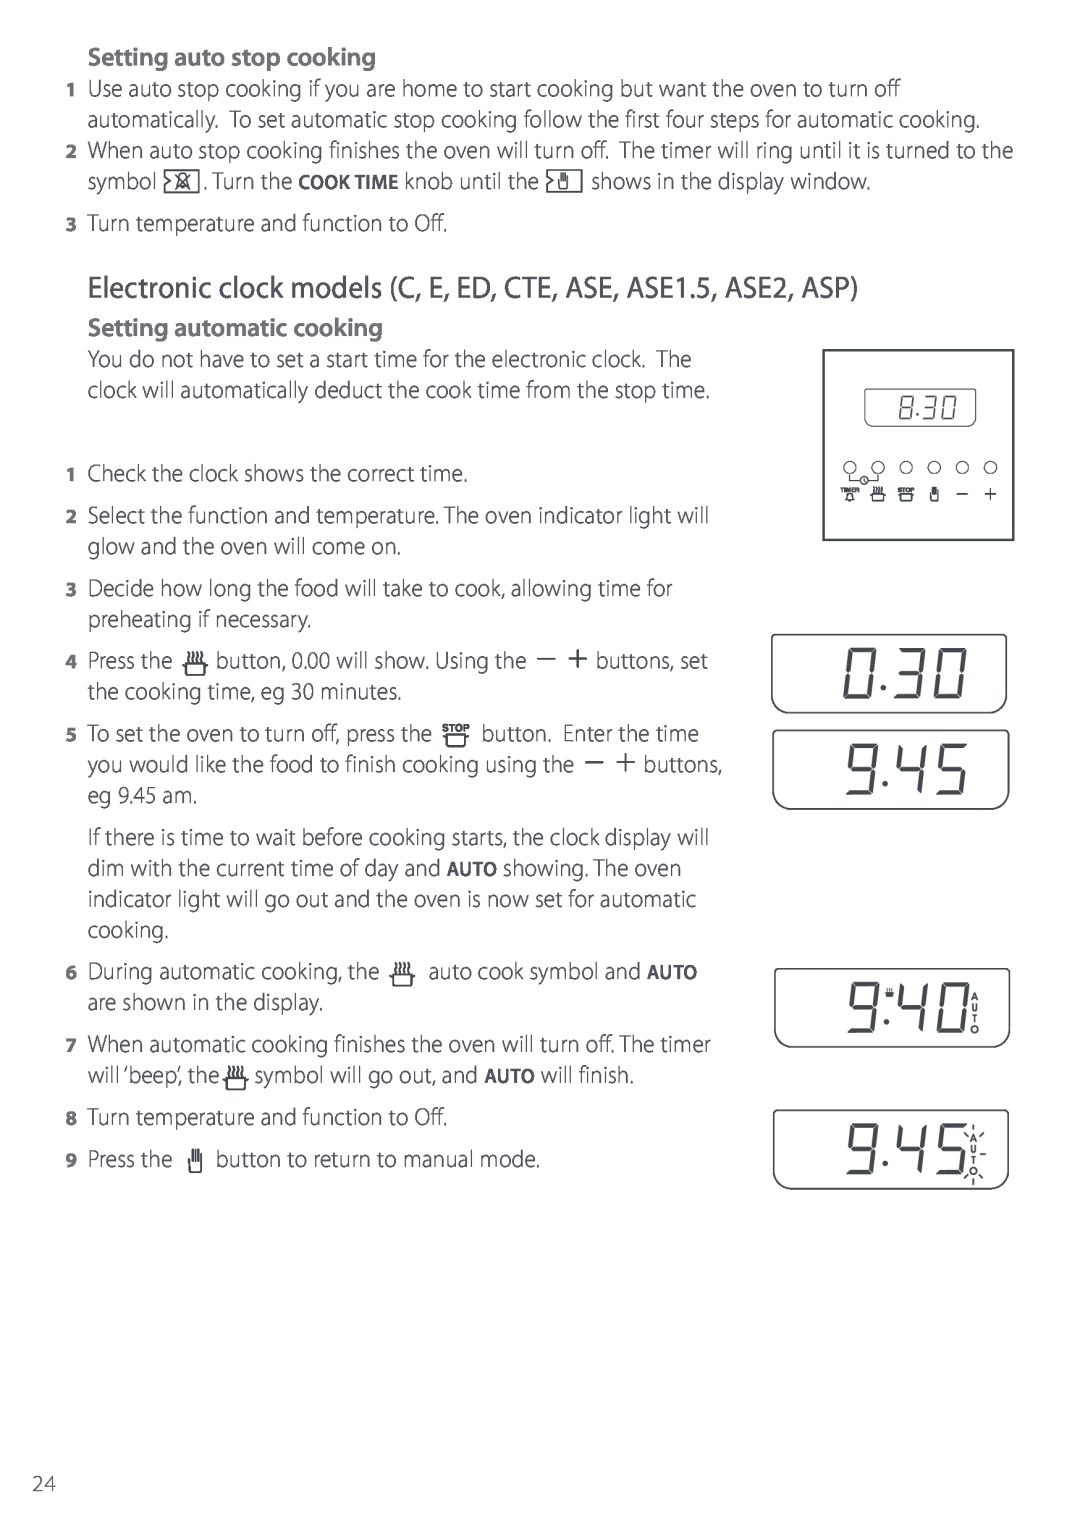 Fisher & Paykel BI452 manual Electronic clock models C, E, ED, CTE, ASE, ASE1.5, ASE2, ASP, Setting auto stop cooking 